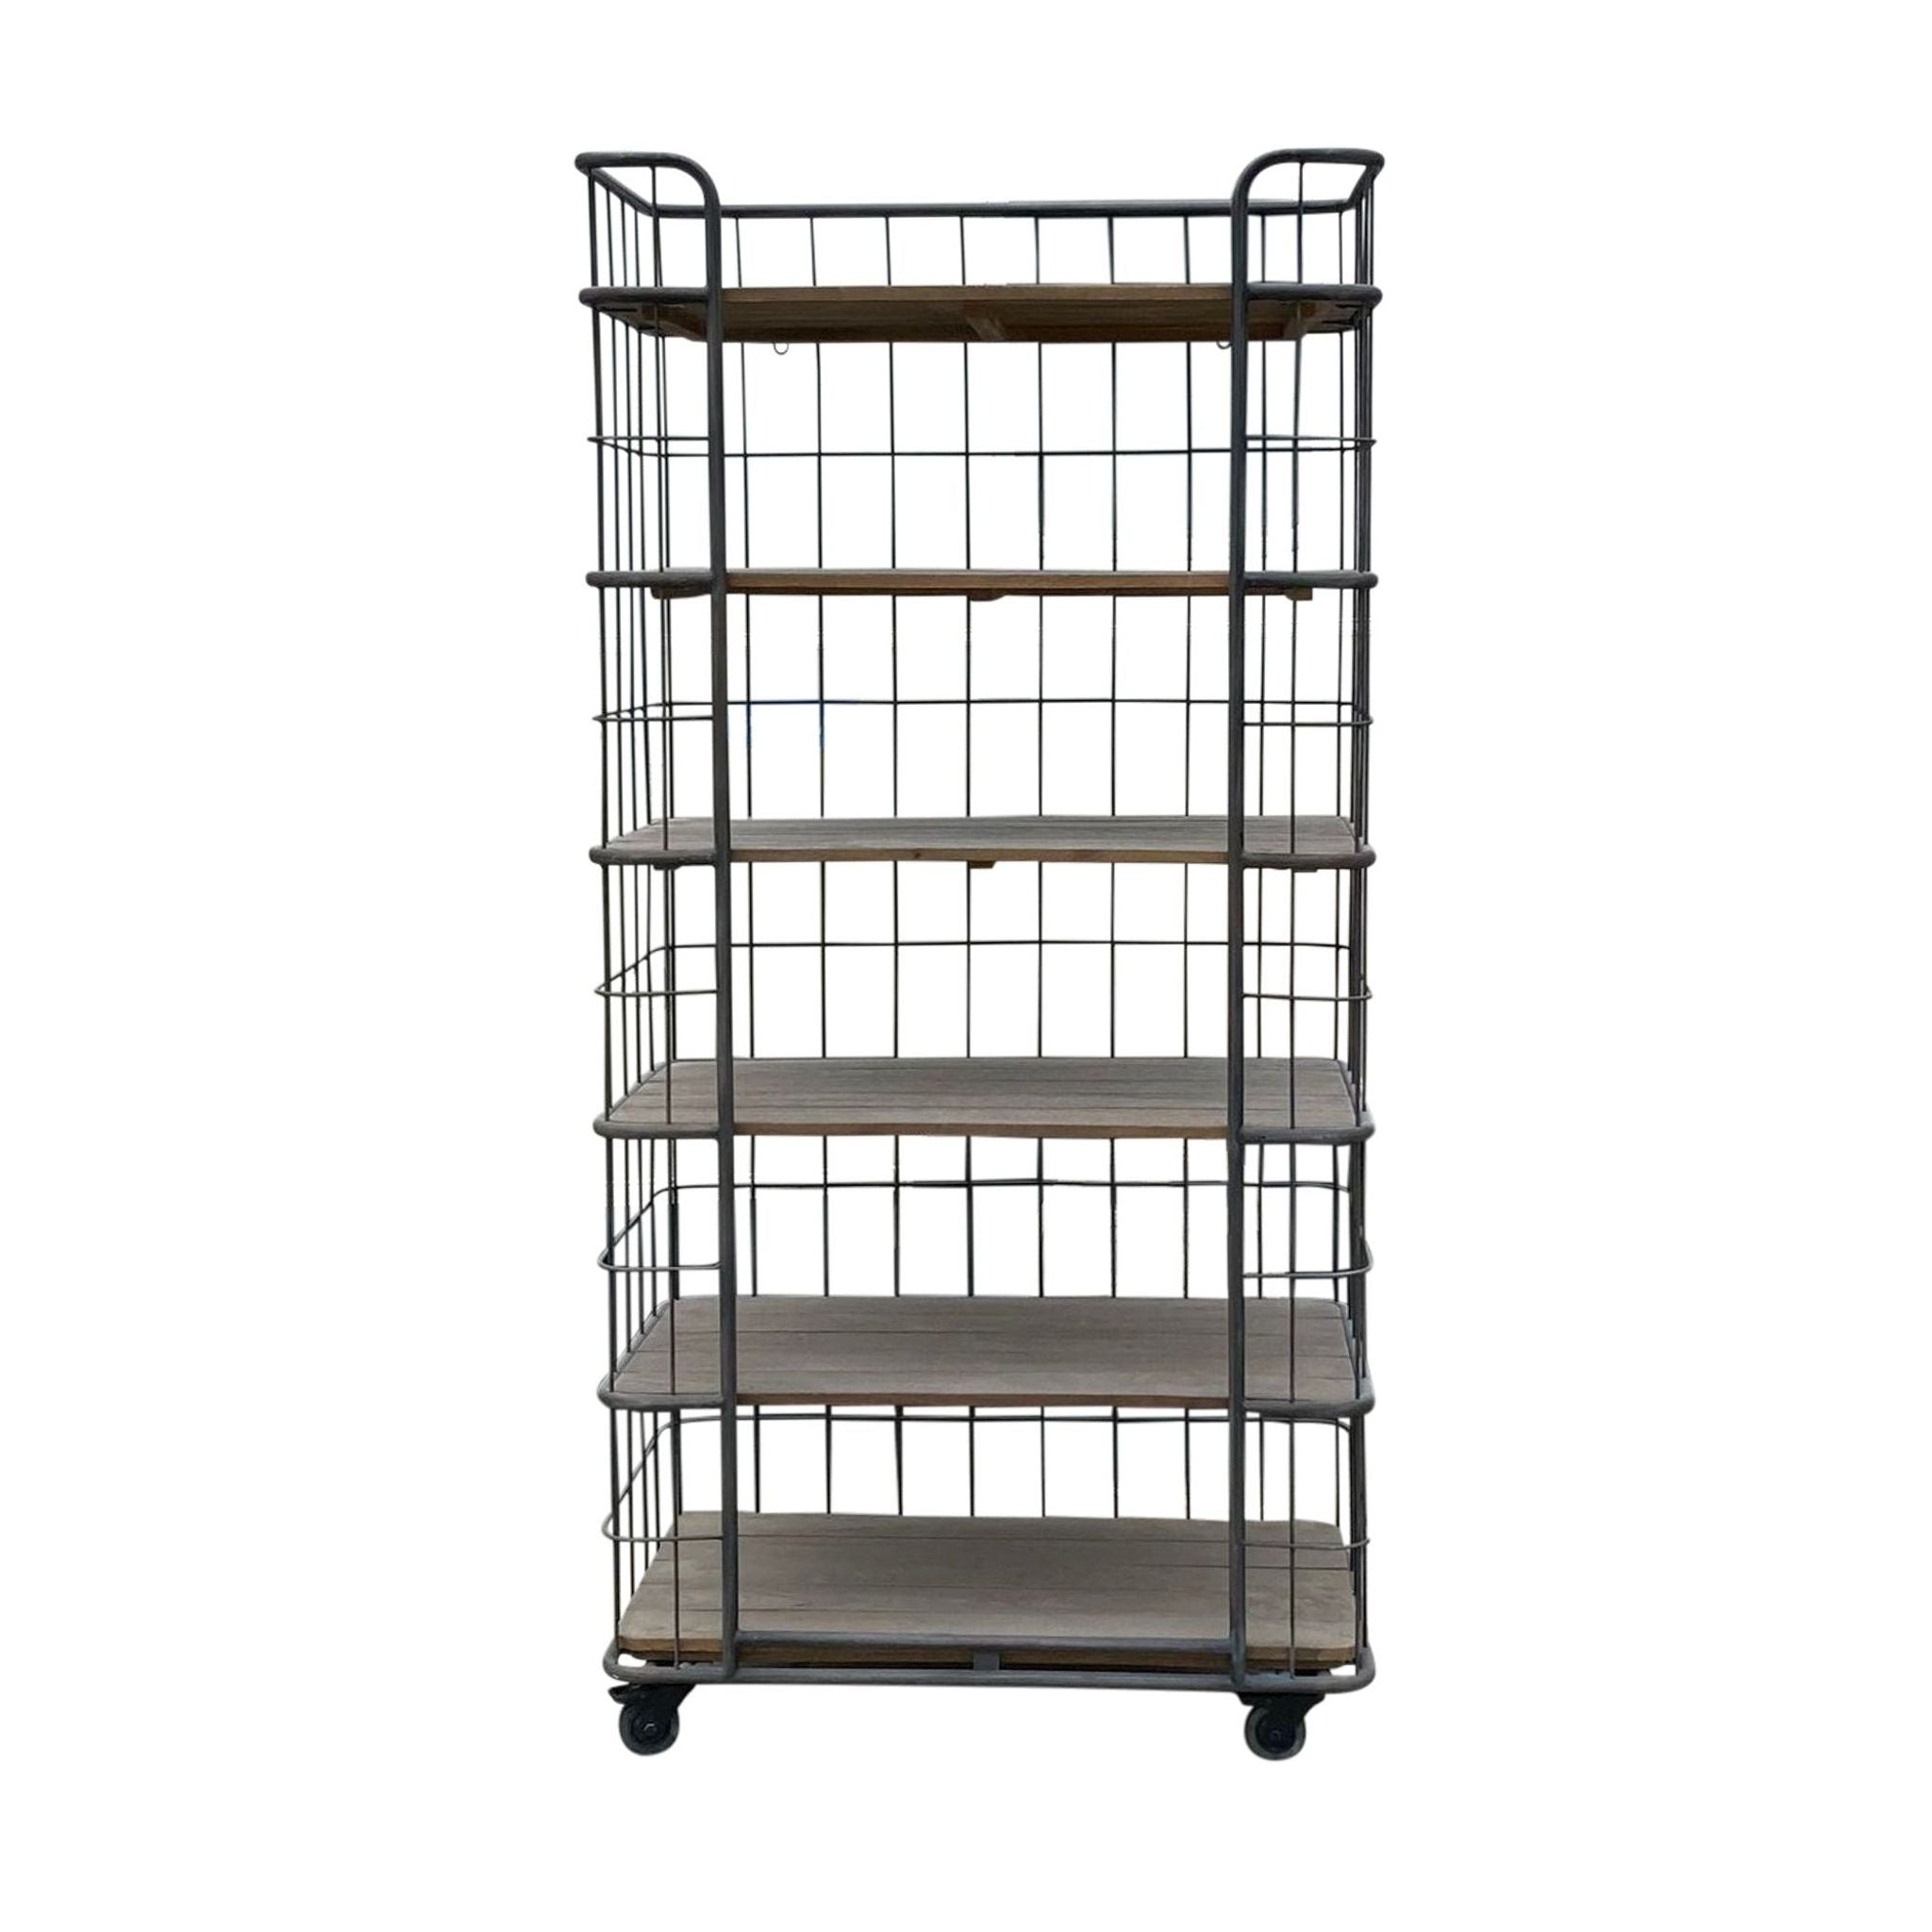 Five-tiered industrial-style rolling bookcase by Restoration Hardware, featuring a metal frame and wooden shelves.